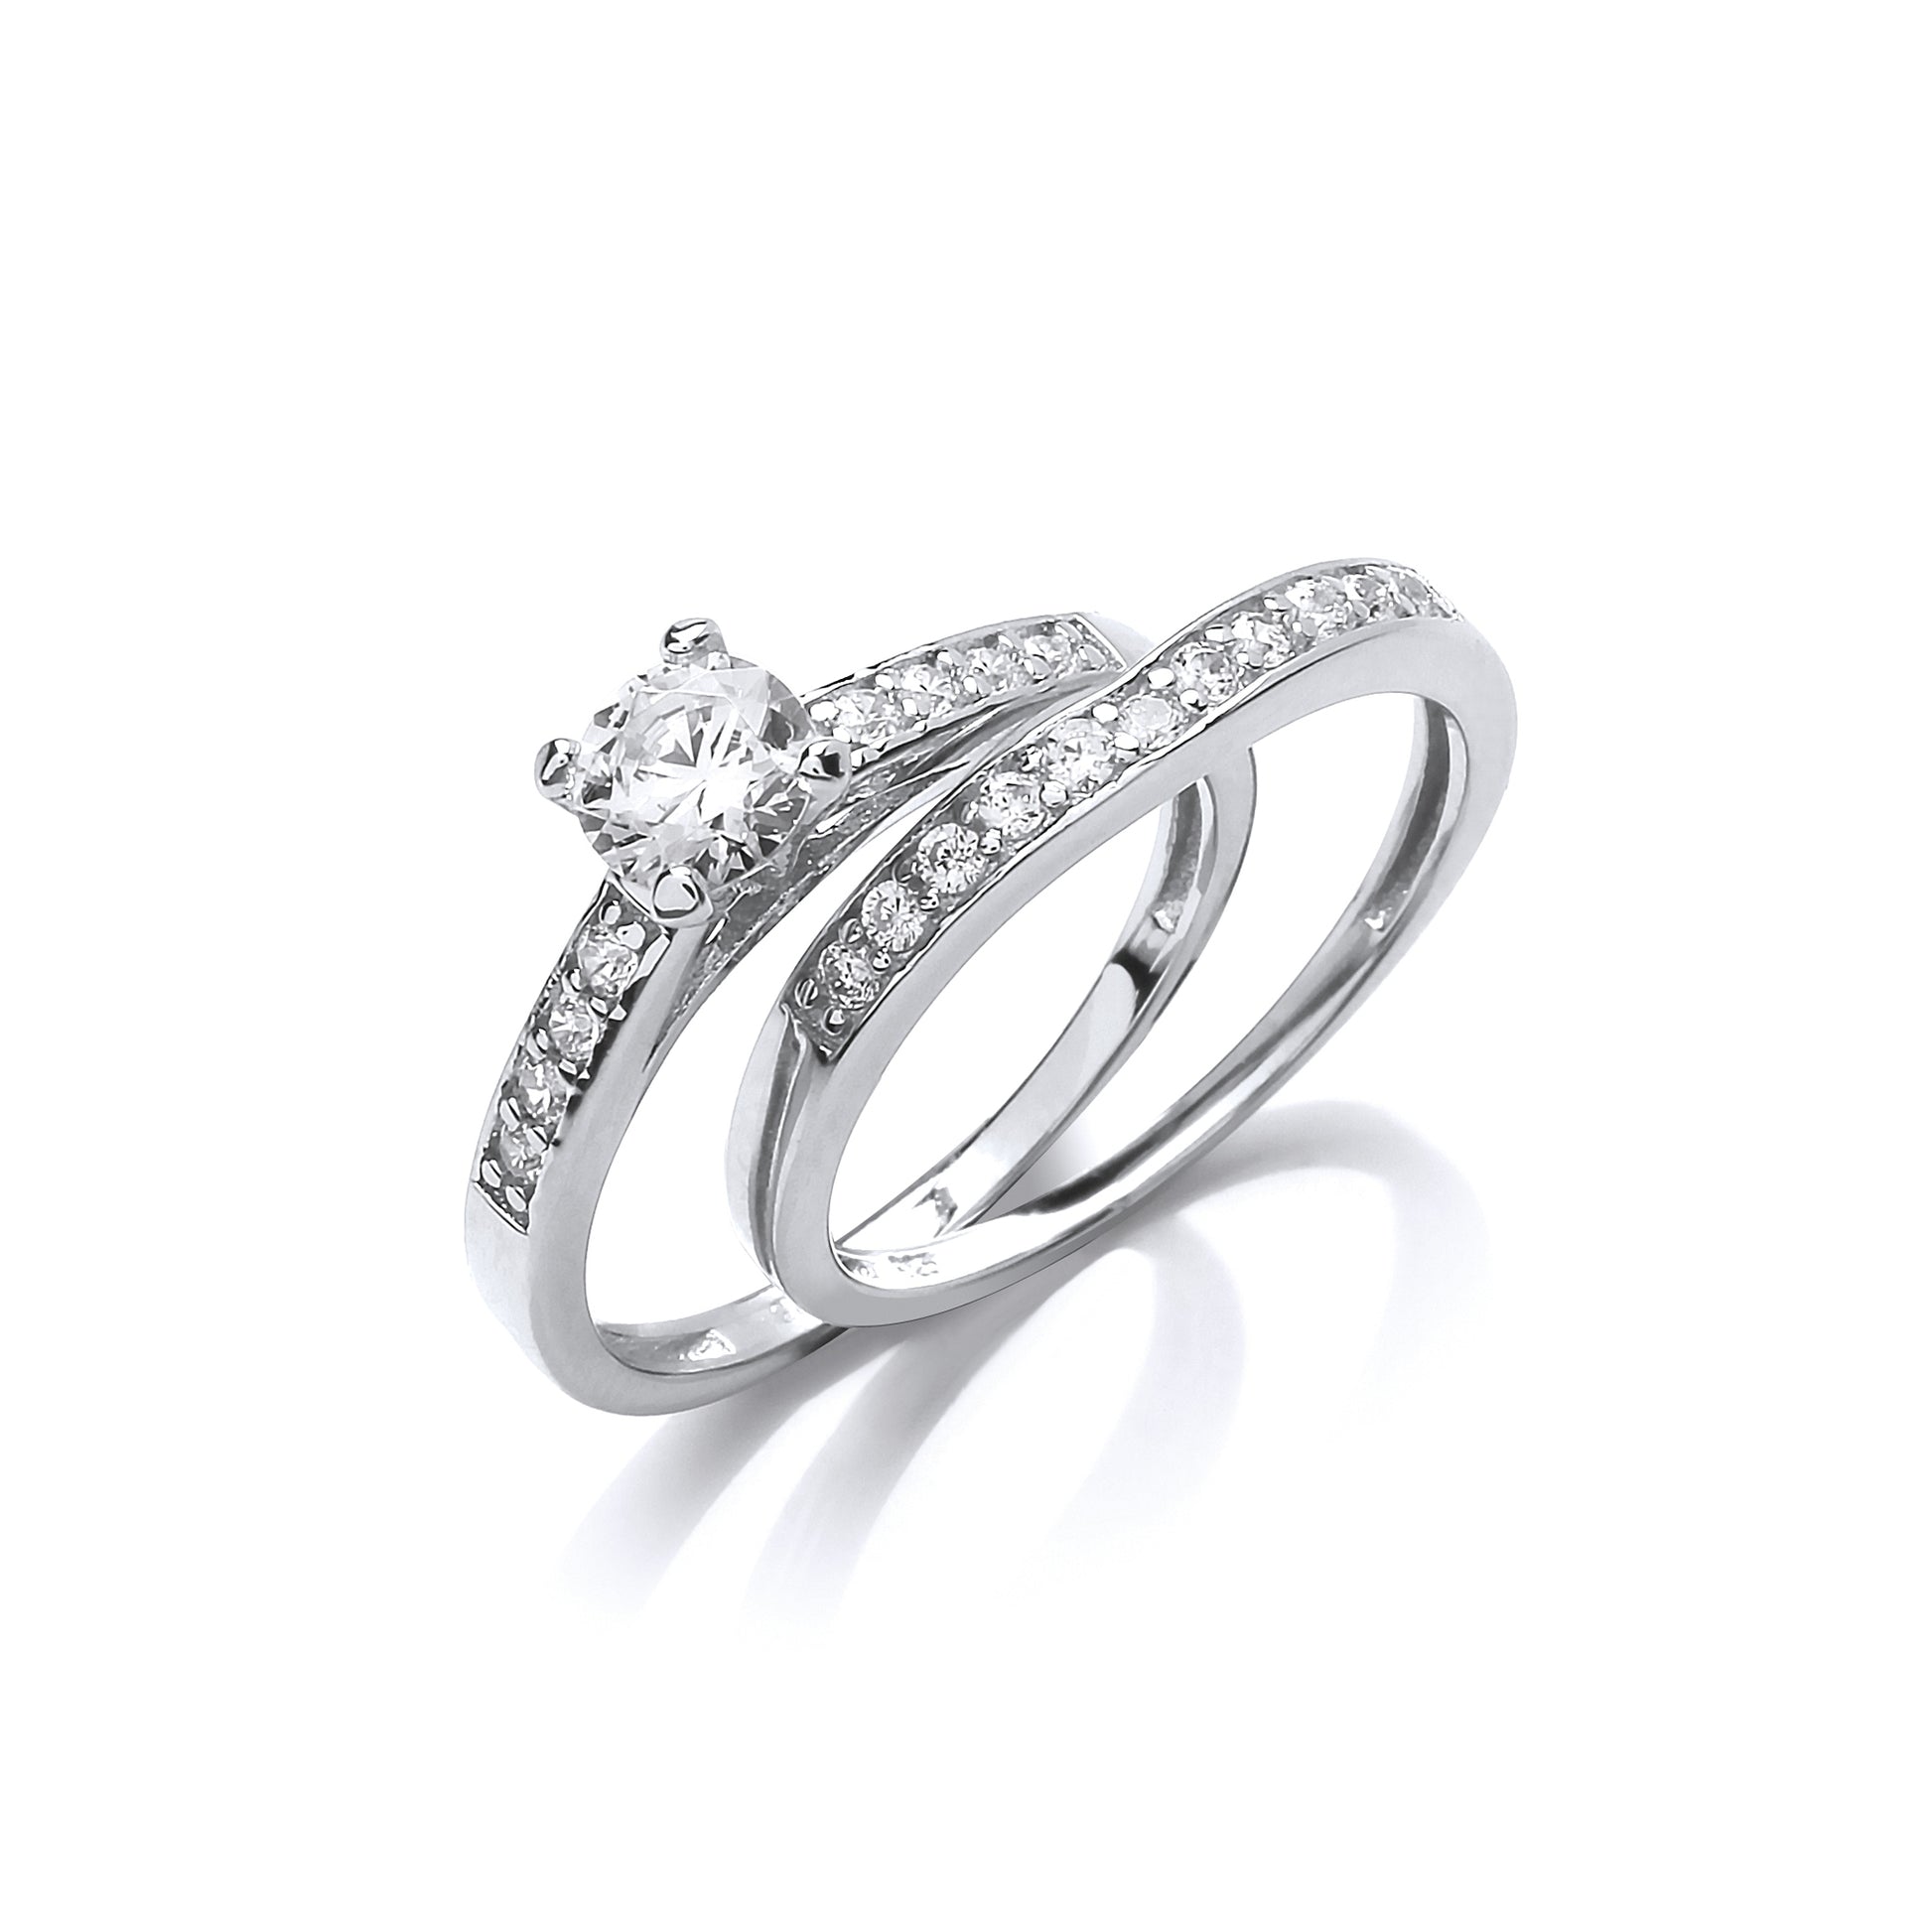 Silver  CZ 6mm Solitaire Wishbone Eternity Bridal Rings Set - GVR851